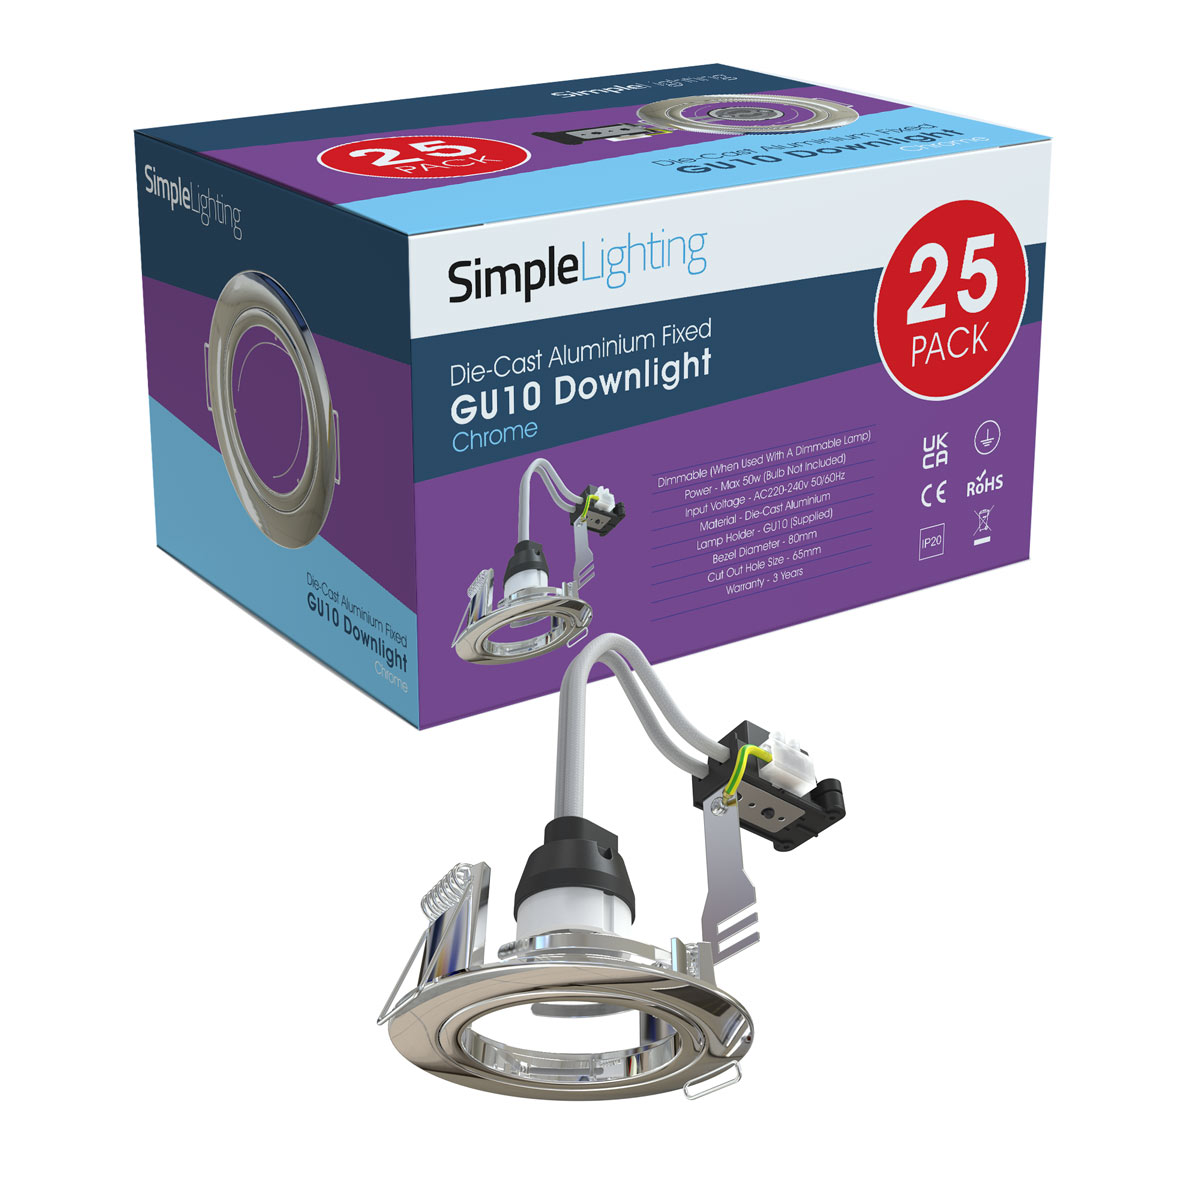 View Pack of 25 GU10 Downlight Fixed Die Cast in a Chrome Finish information